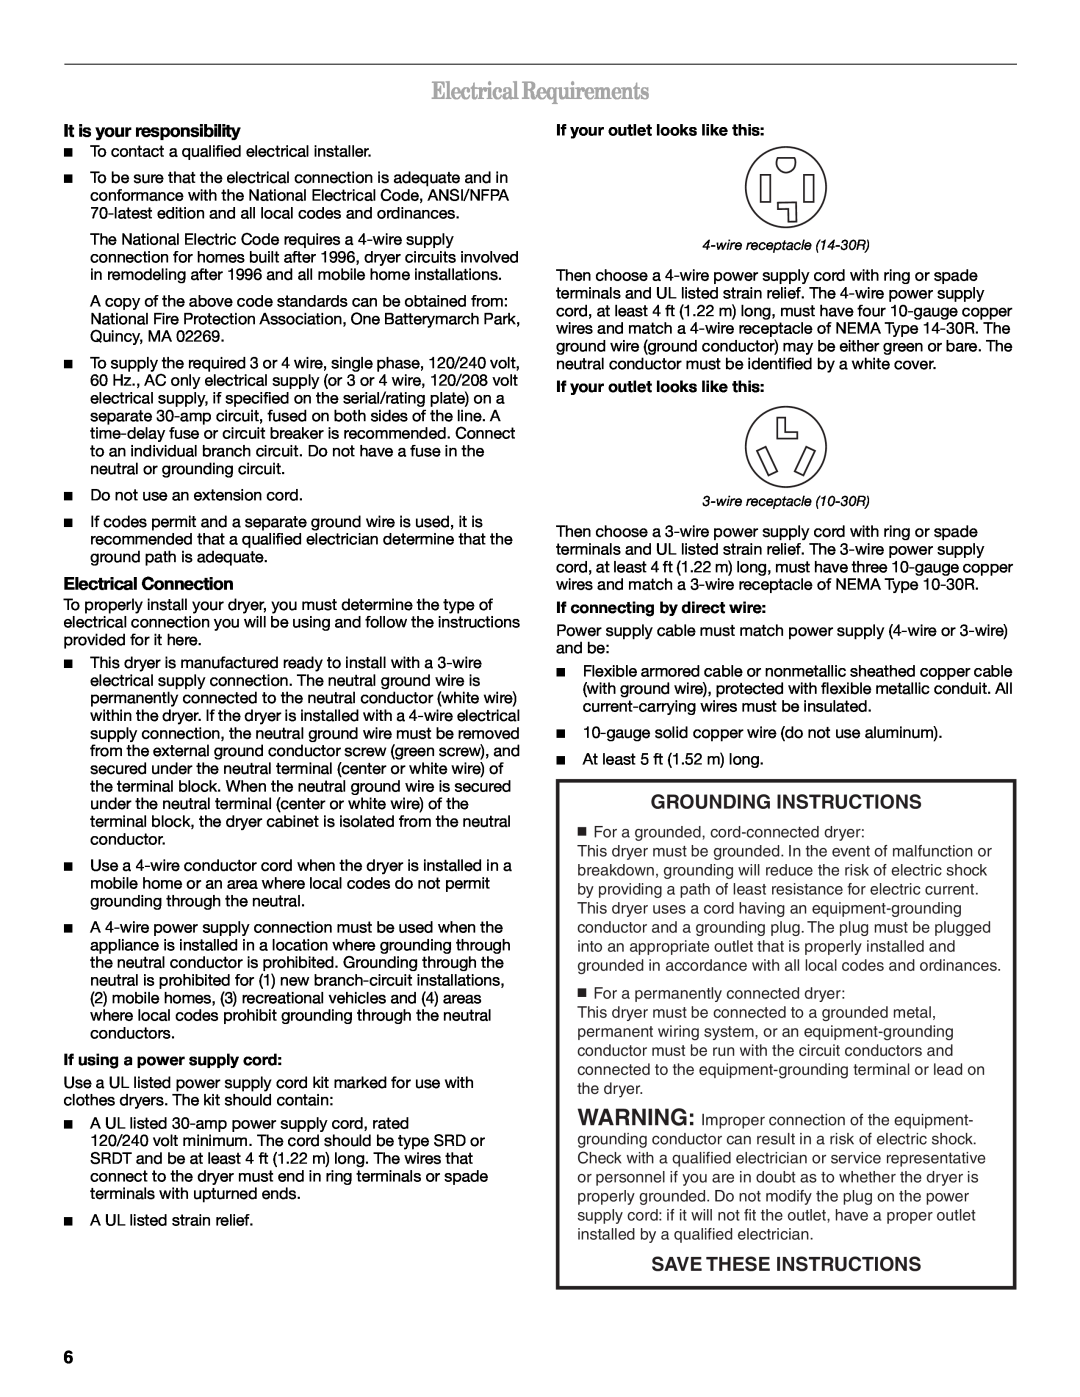 Whirlpool 8578567 Electrical Requirements, It is your responsibility, Electrical Connection, If using a power supply cord 